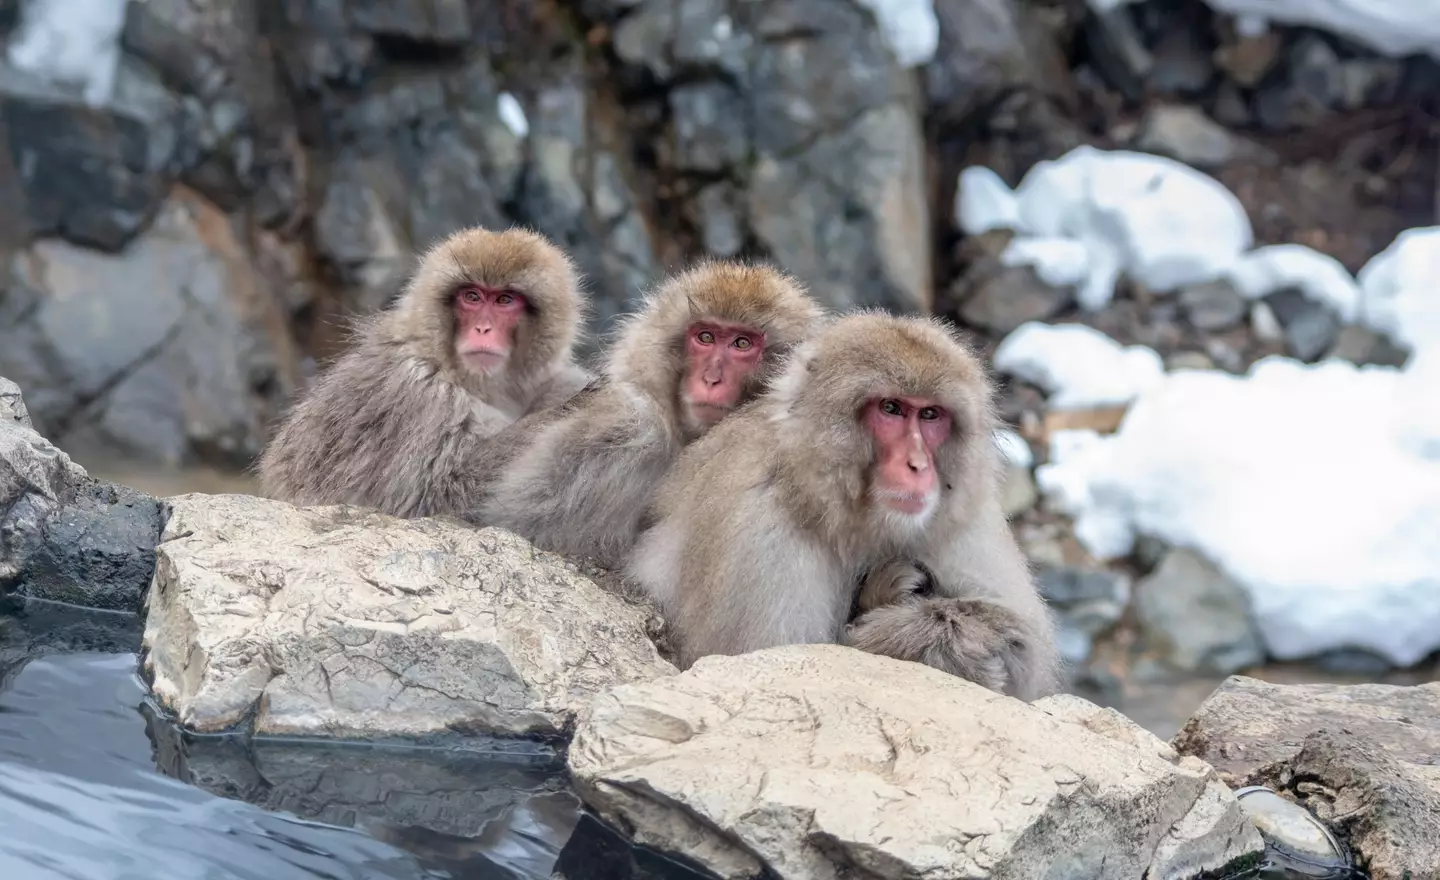 Macaques have been observed for over 70 years and have never been seen using tools. (Alamy)